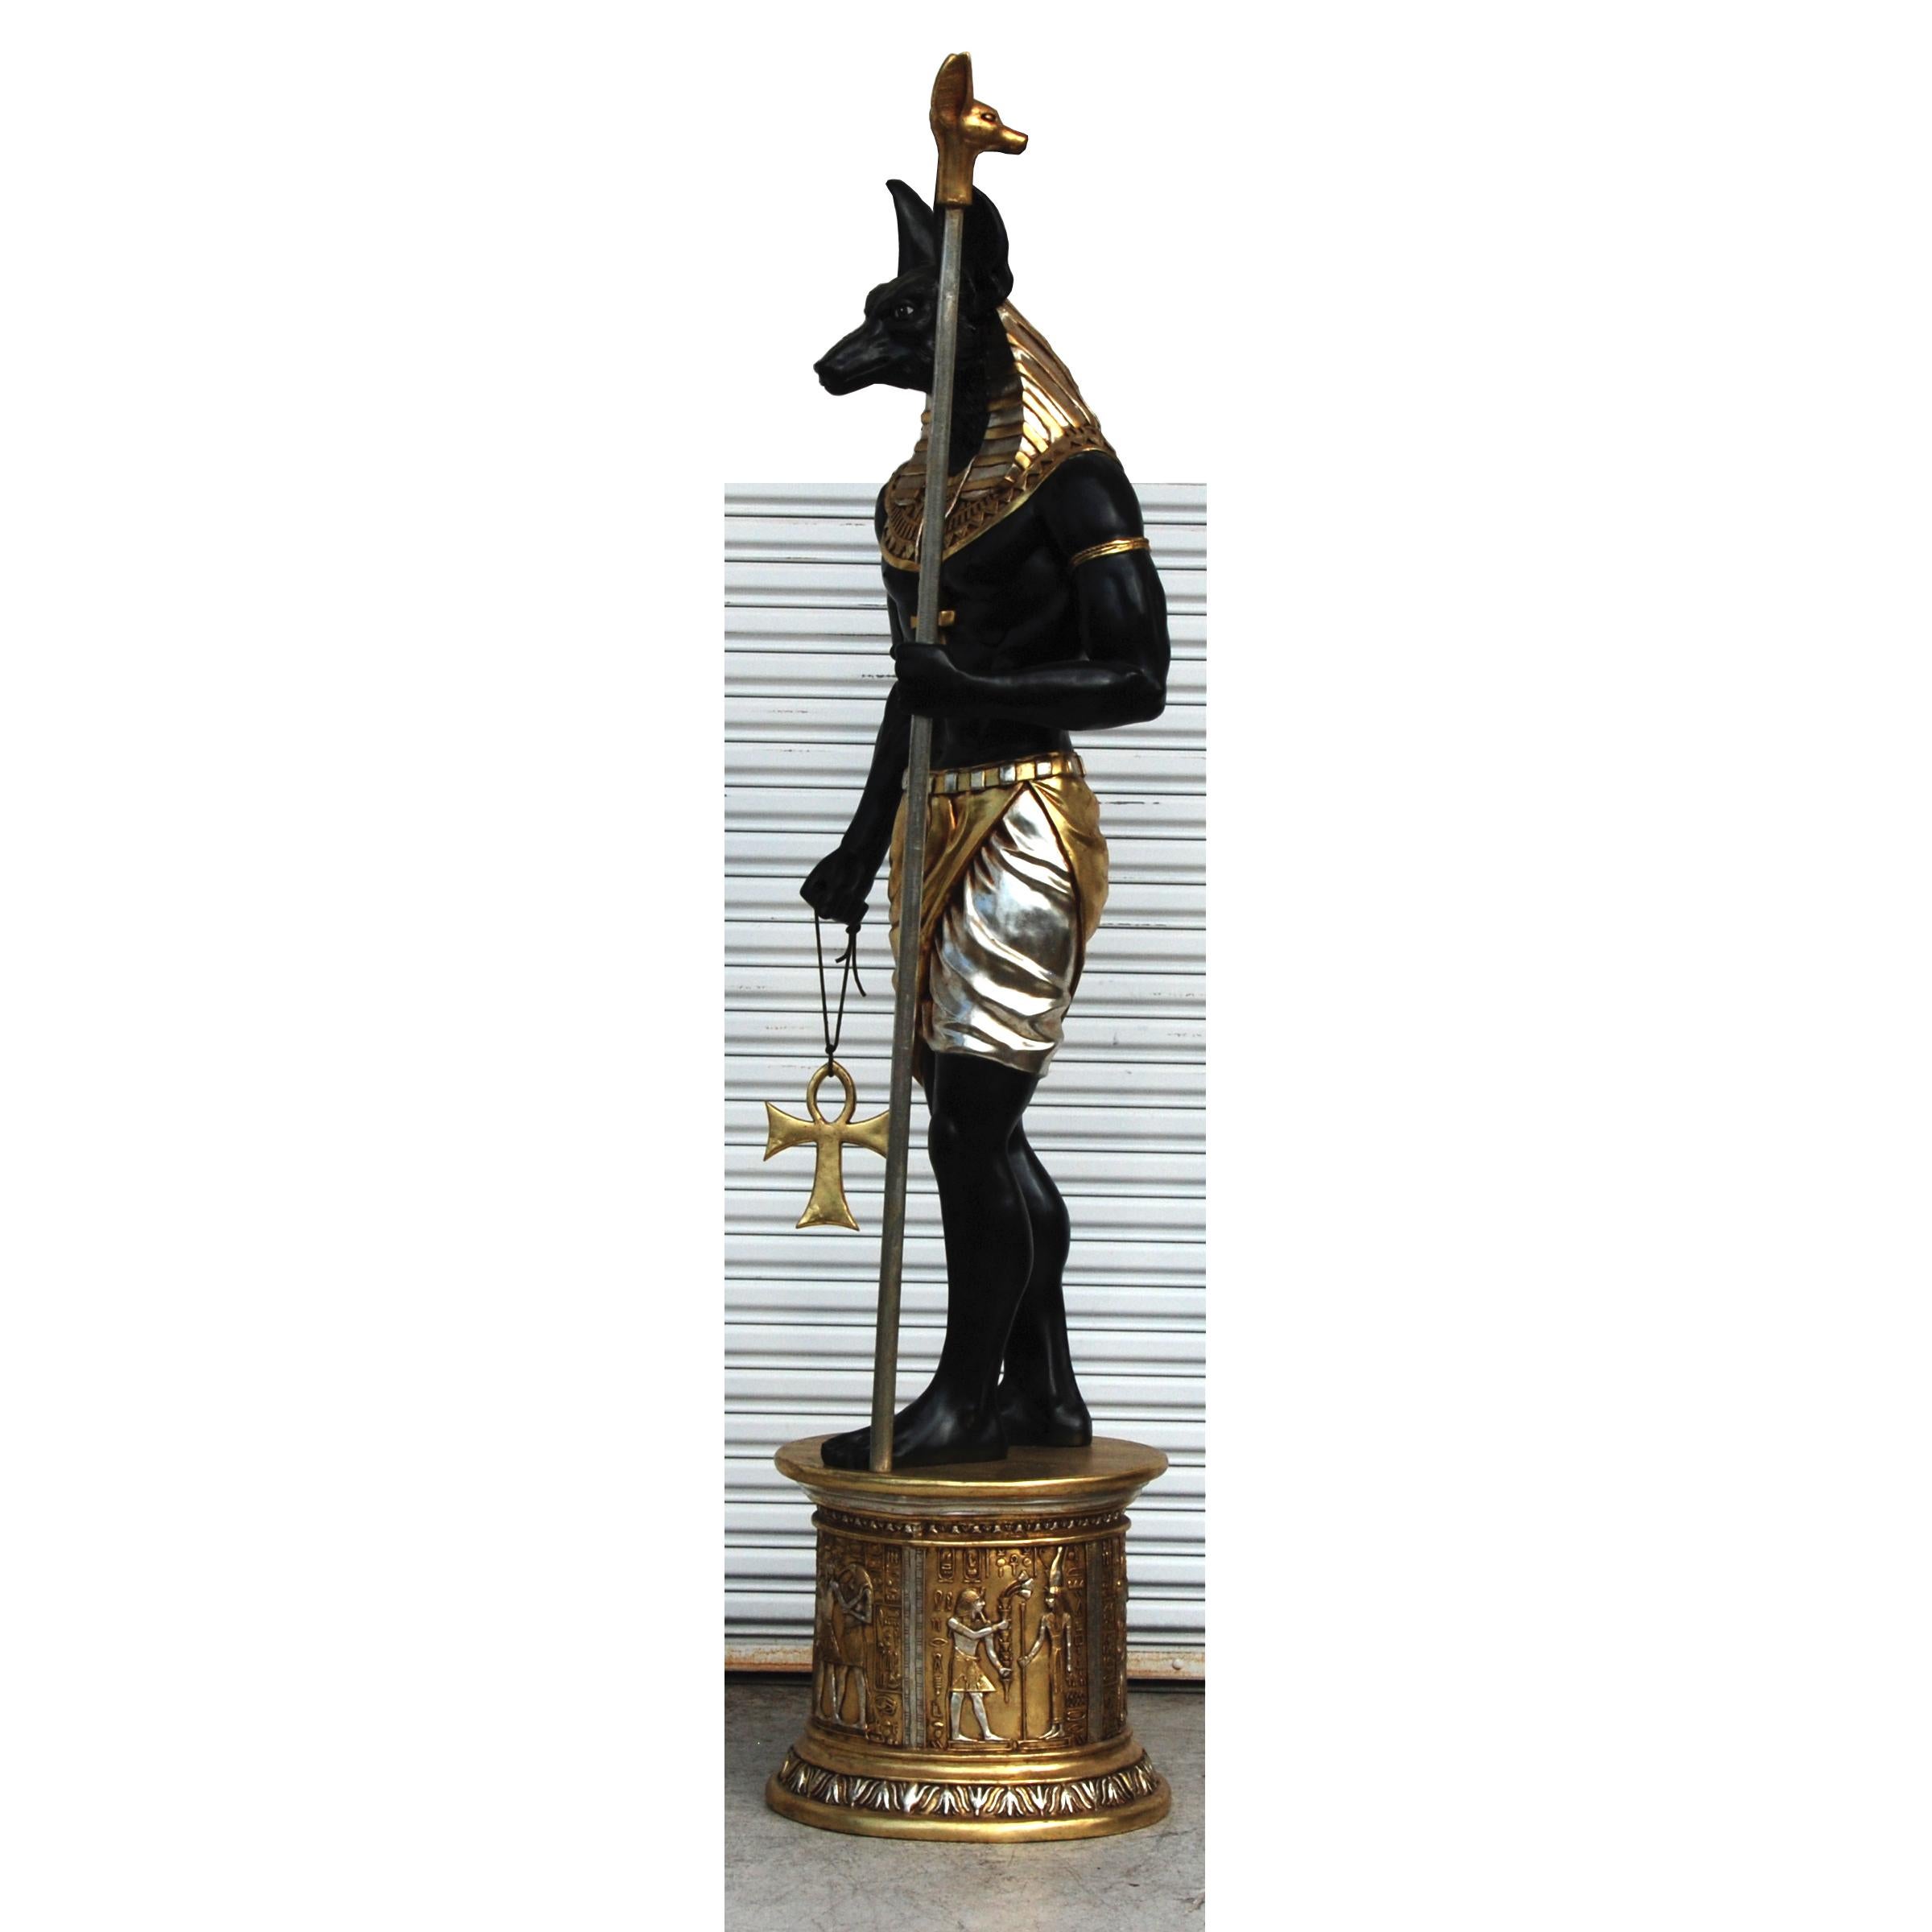 About The Egyptian God Anubis: He was recognized as a God of the dead and mummification, was believed by the Ancient Egyptians to have invented the process of embalming. Anubis is one of the oldest Egyptian Gods.

Statue features ornate gold